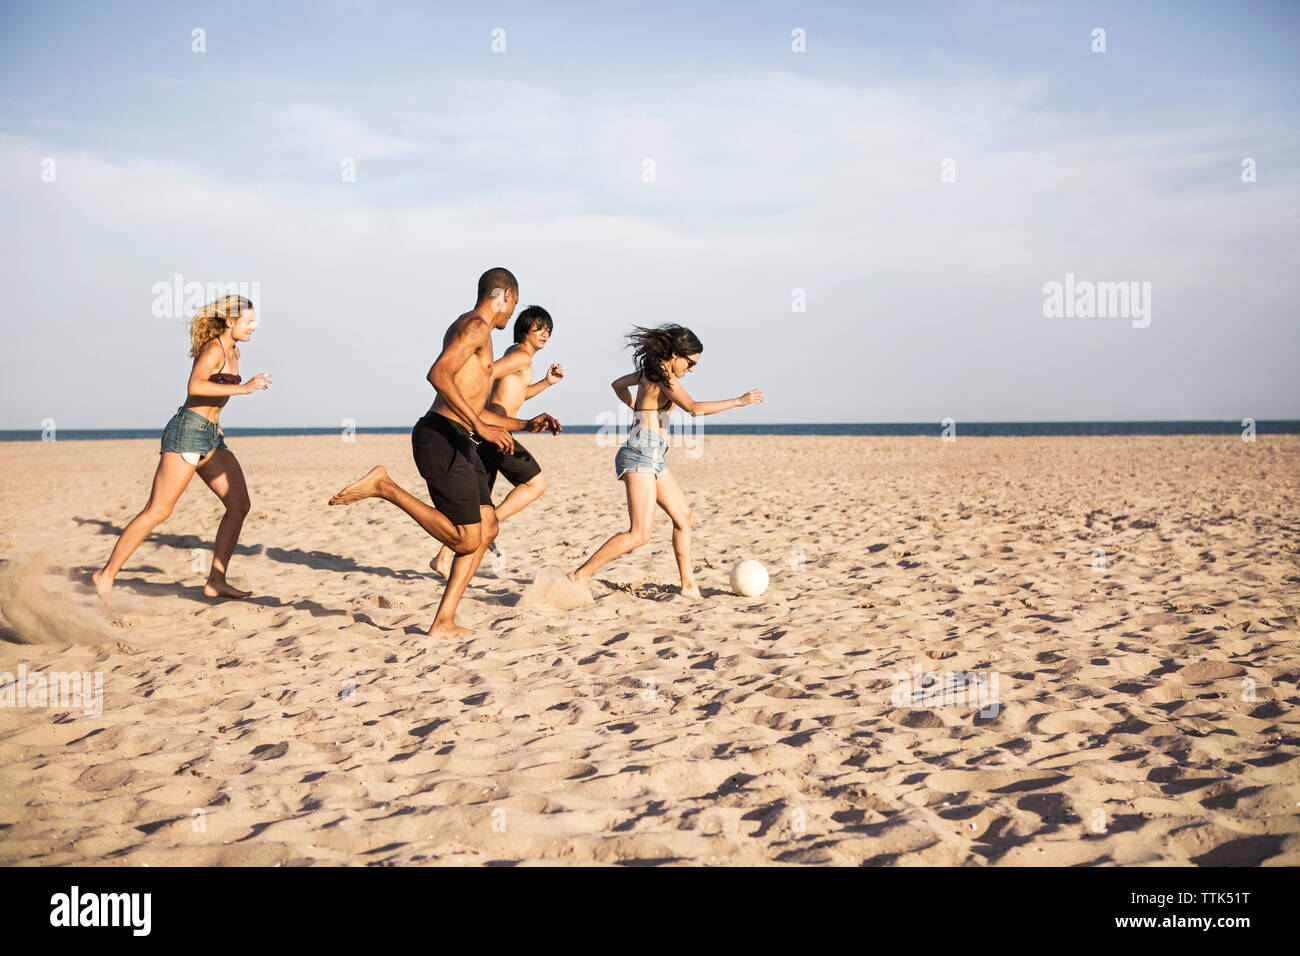 Friends playing soccer on sand at beach against sky Stock Photo